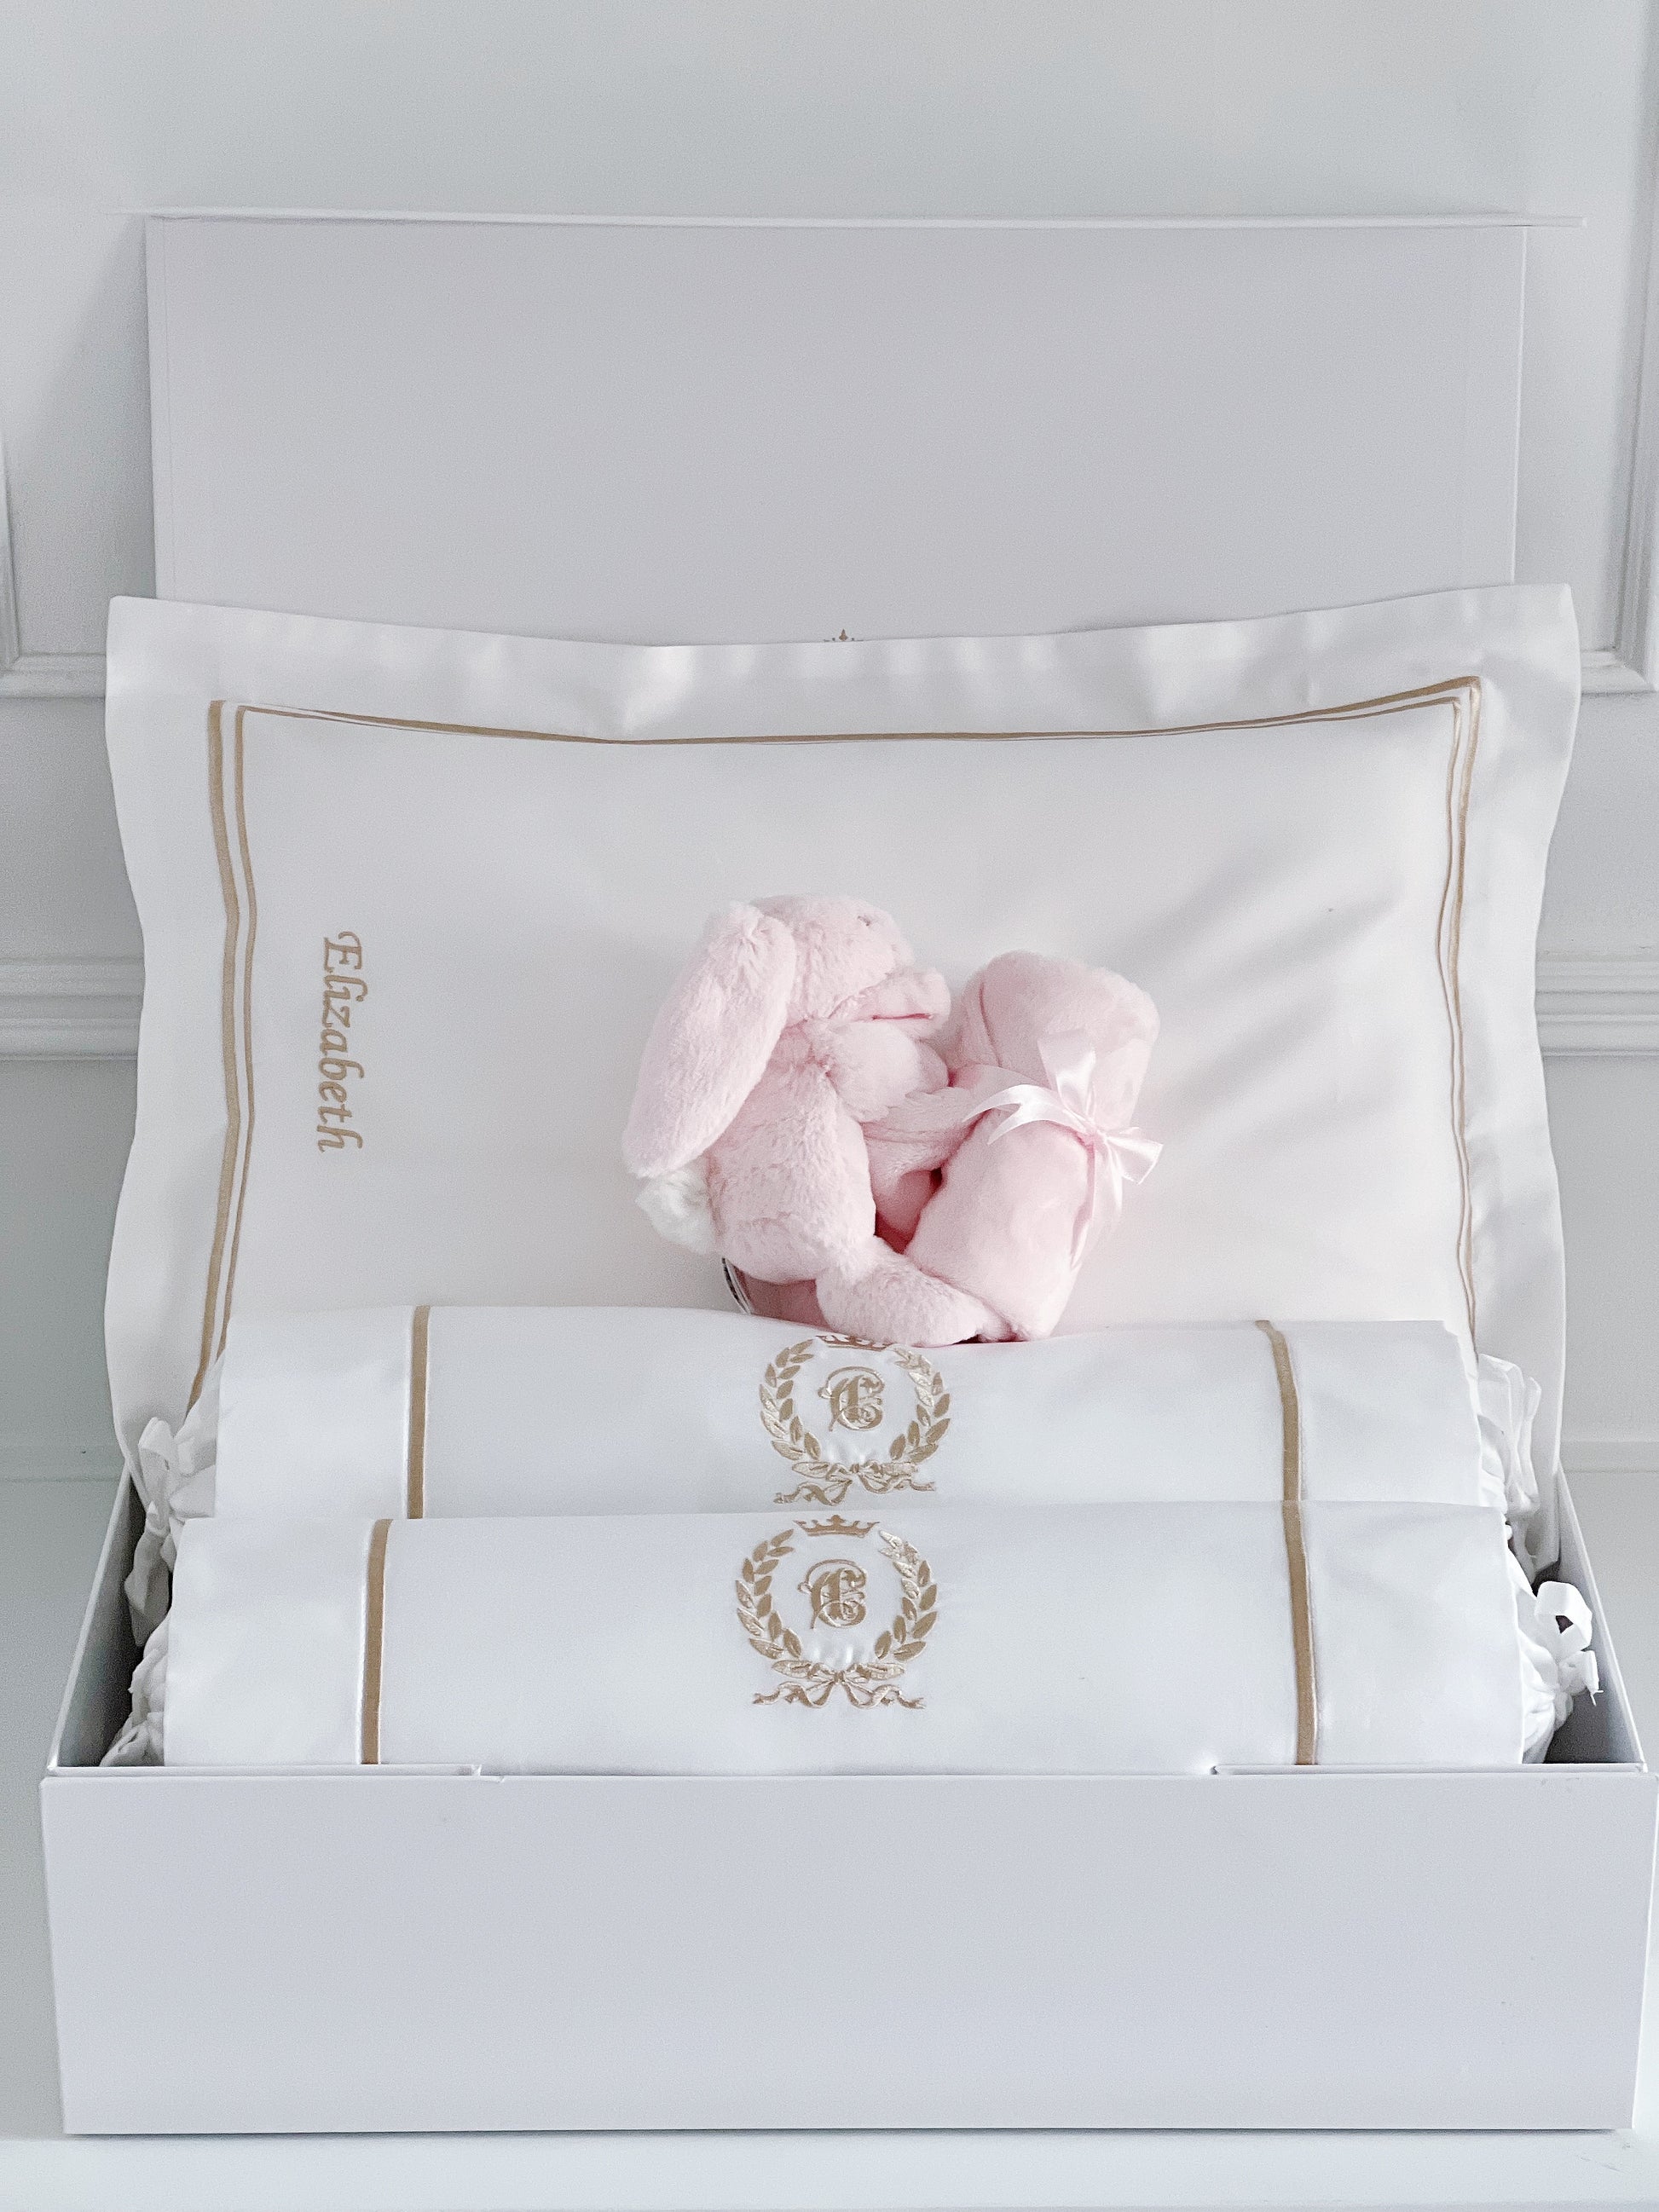 Jellycat Bashful Pink Bunny Soother Baby Gift Set with name customisation - Count & Countess Baby Beddings & Gifts